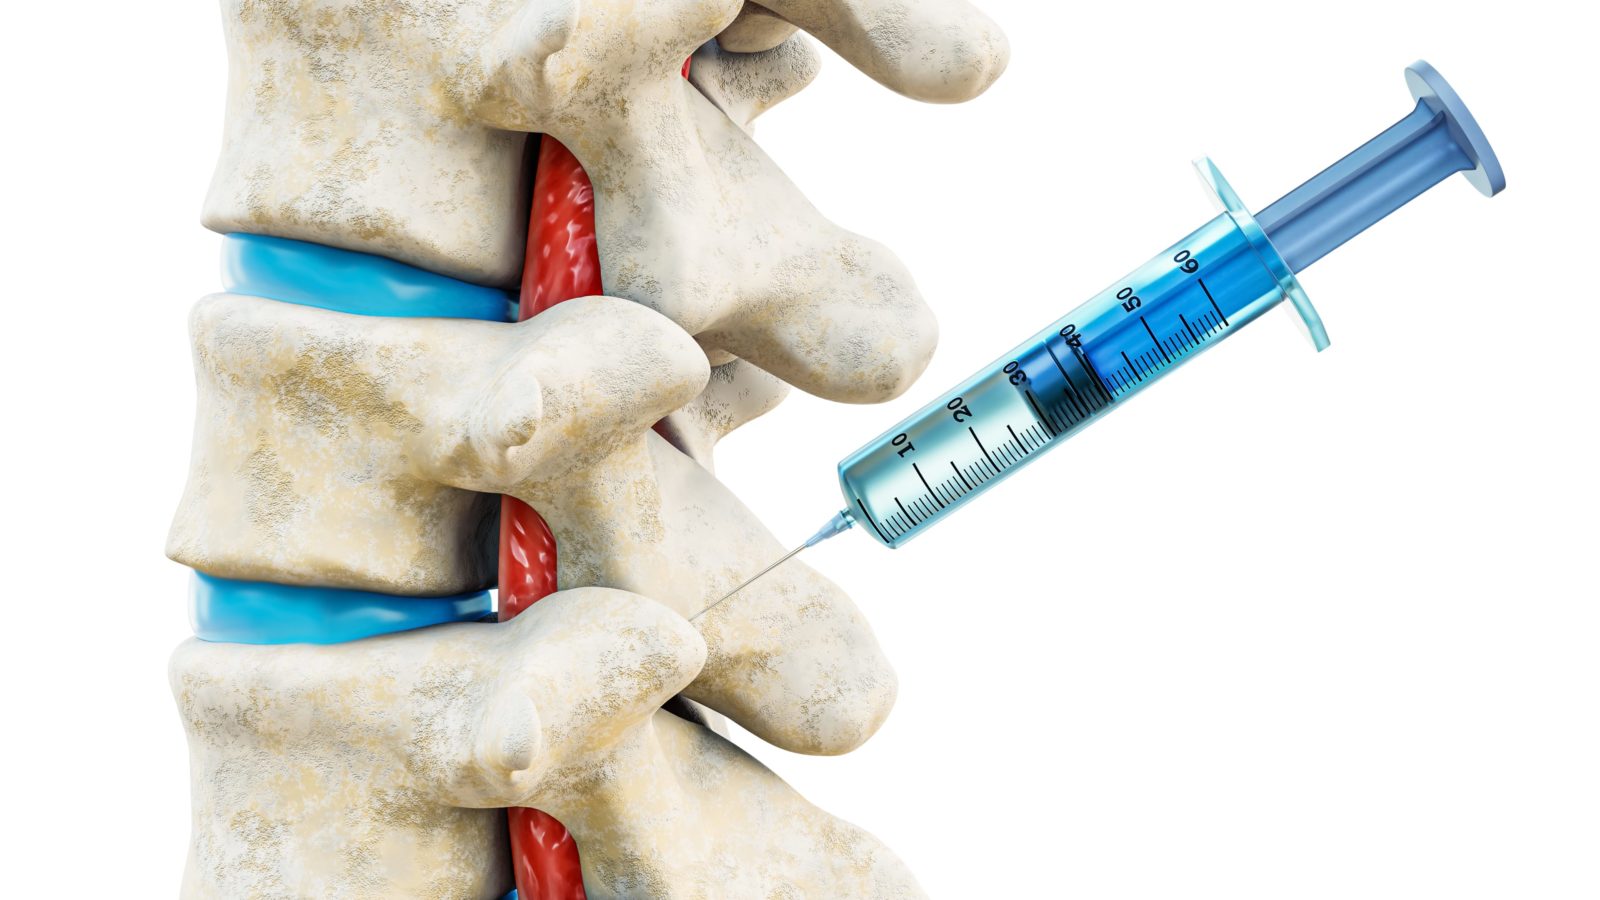 facet joint spinal injection